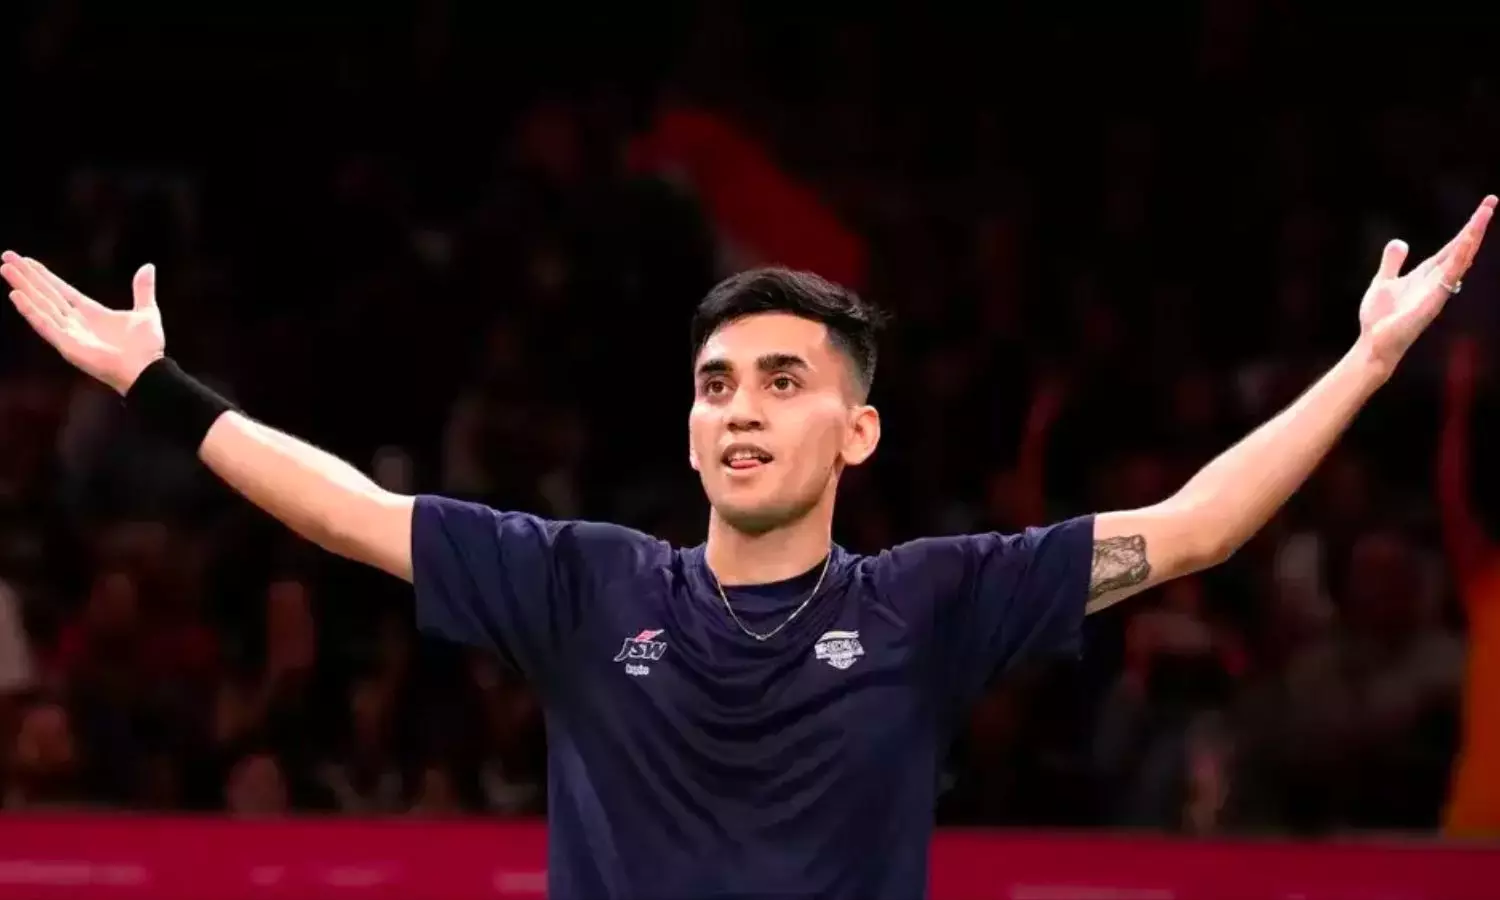 Japan Open 2022 Lakshya, Saina, Prannoy in action- Preview, Schedule, When to watch, Live Stream